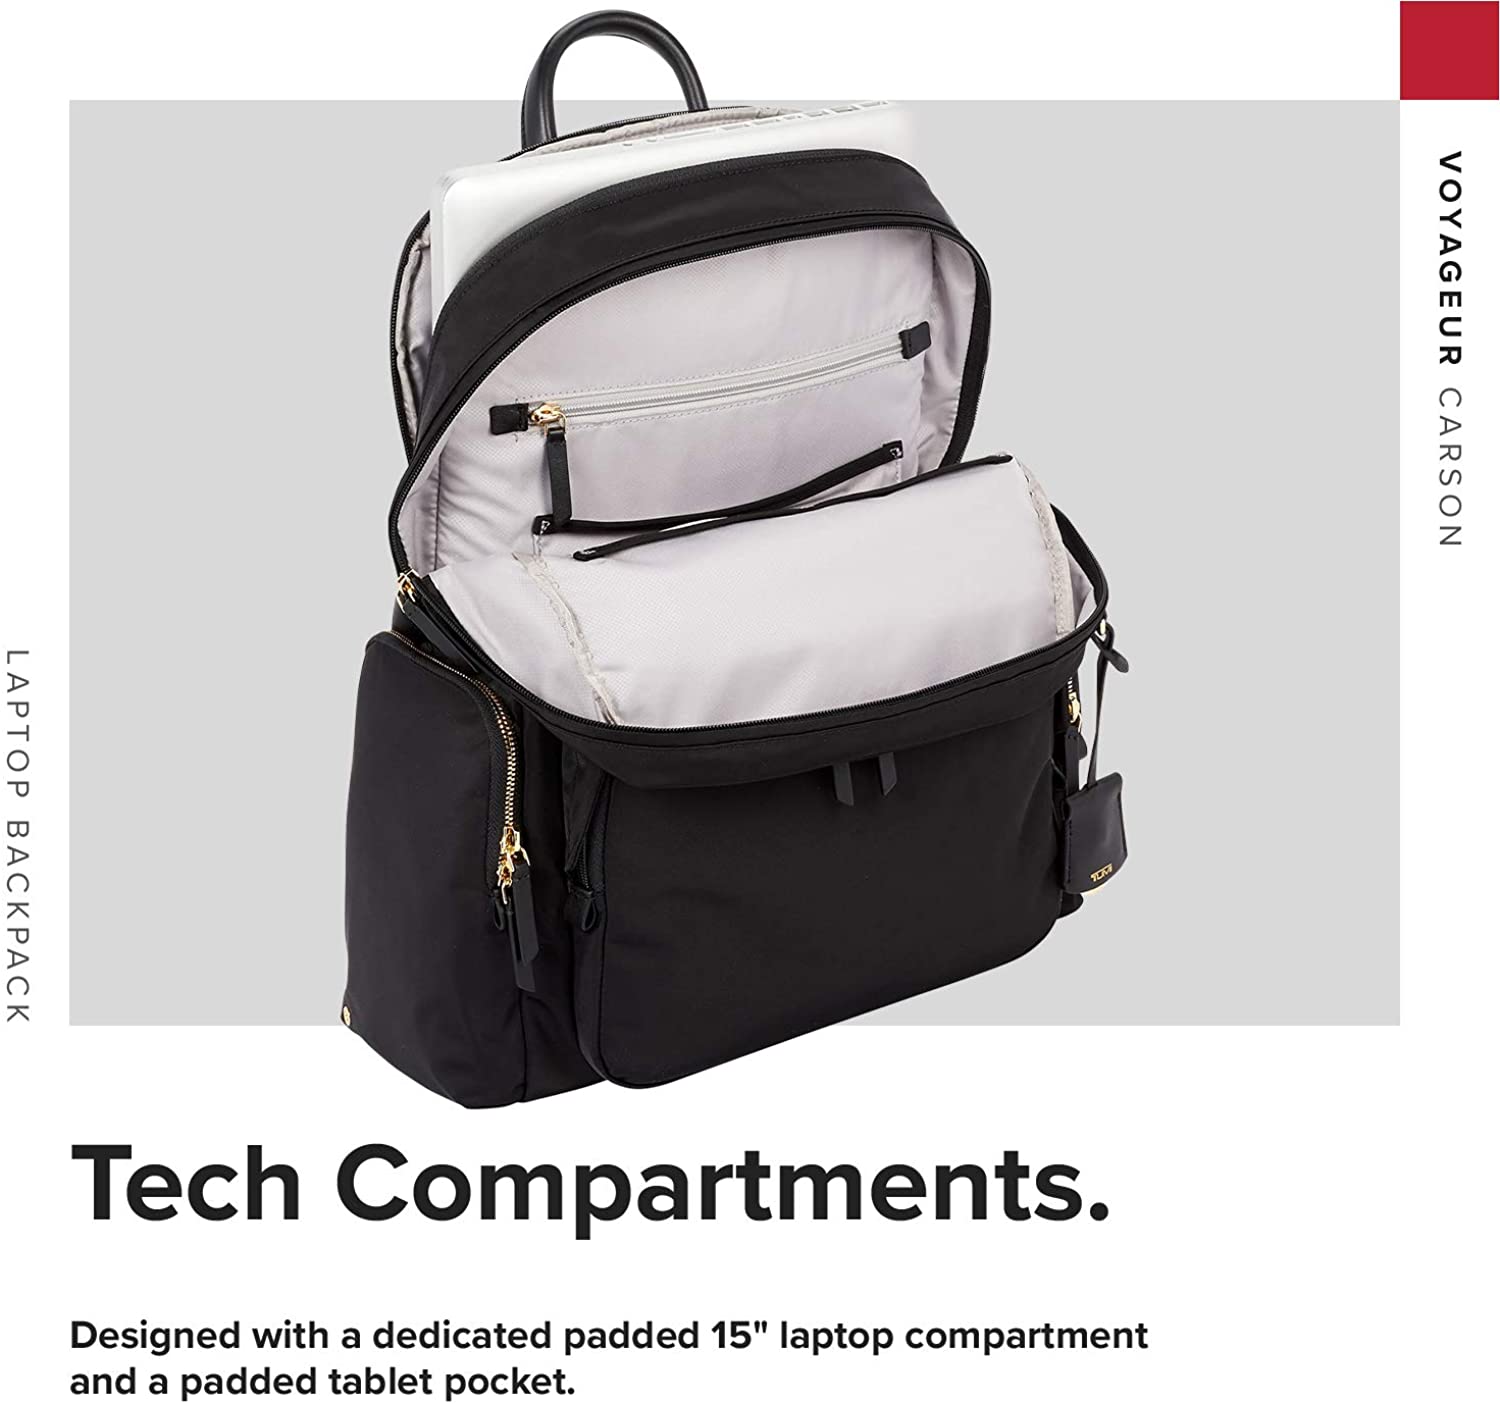 TUMI - Voyageur Carson Laptop Backpack - 15 Inch Computer Bag for Women - image 3 of 6